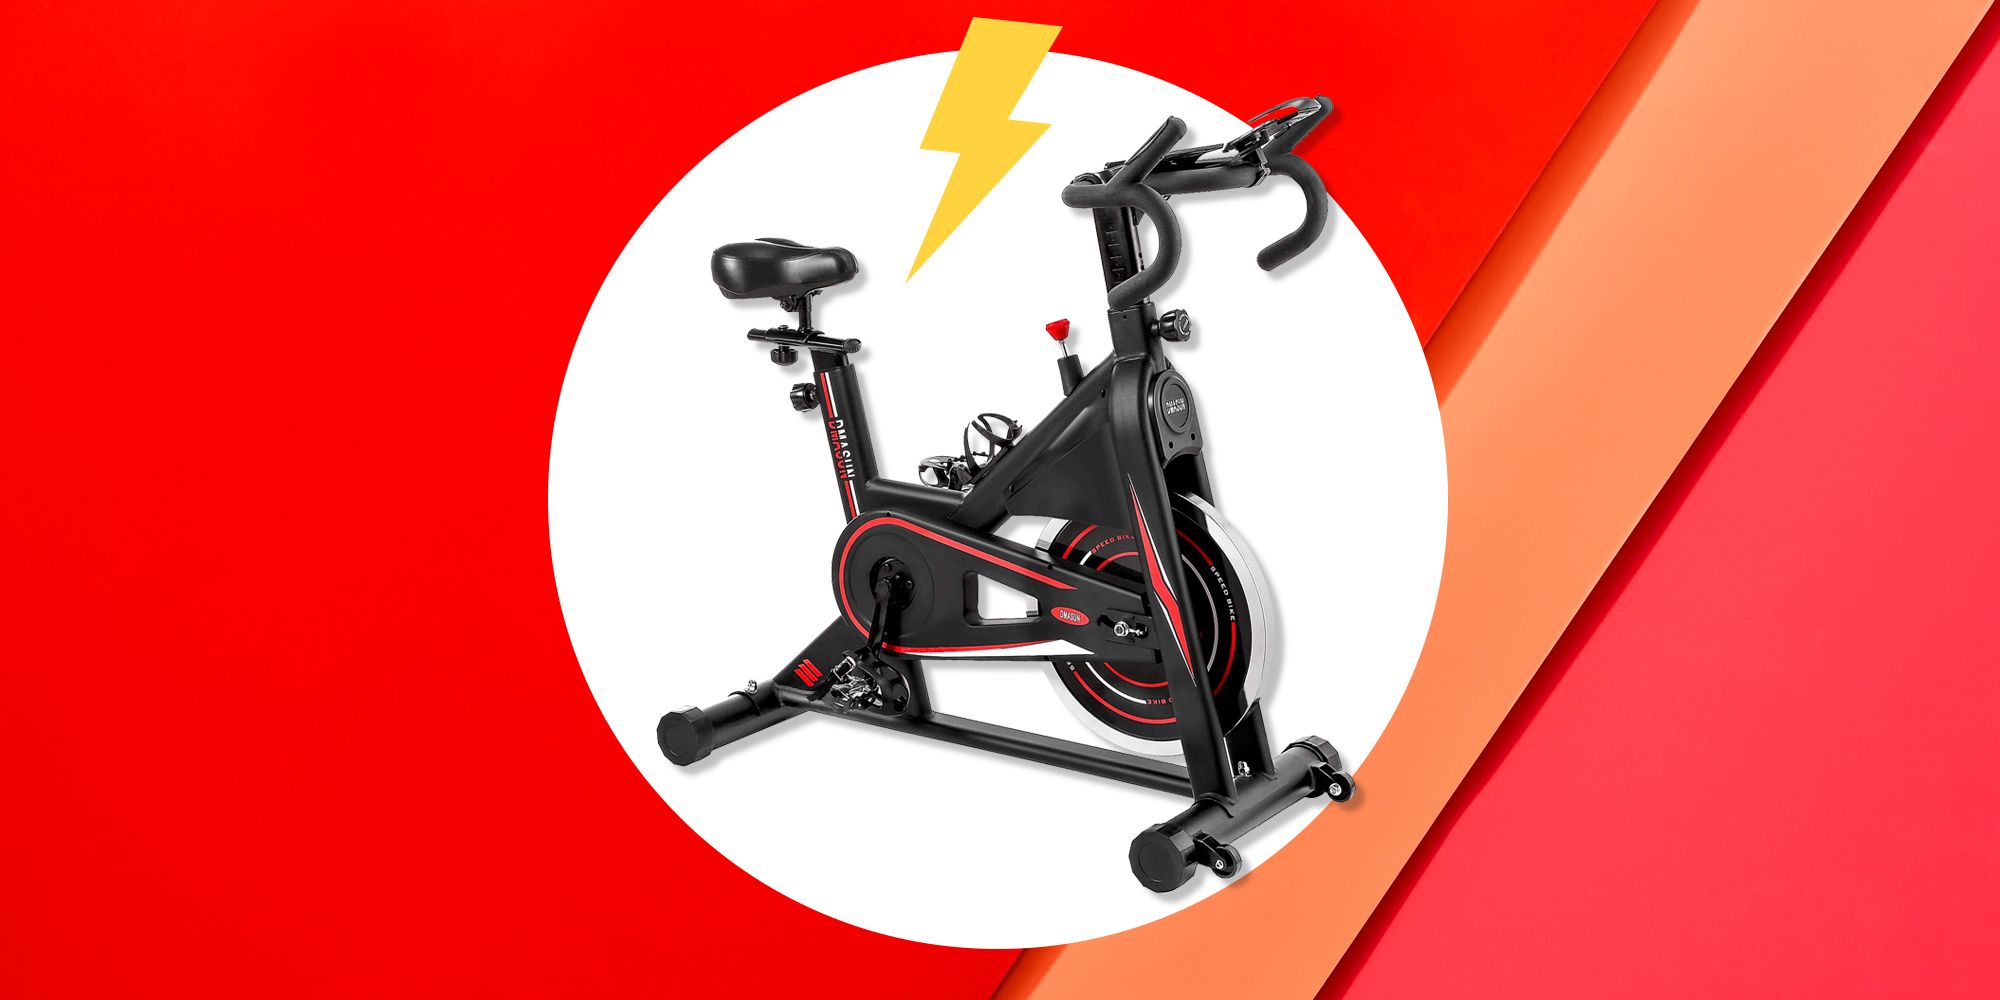 Bicycle Cycling Gym Exercise Stationary Cardio Bike Home Office Fitness Training 